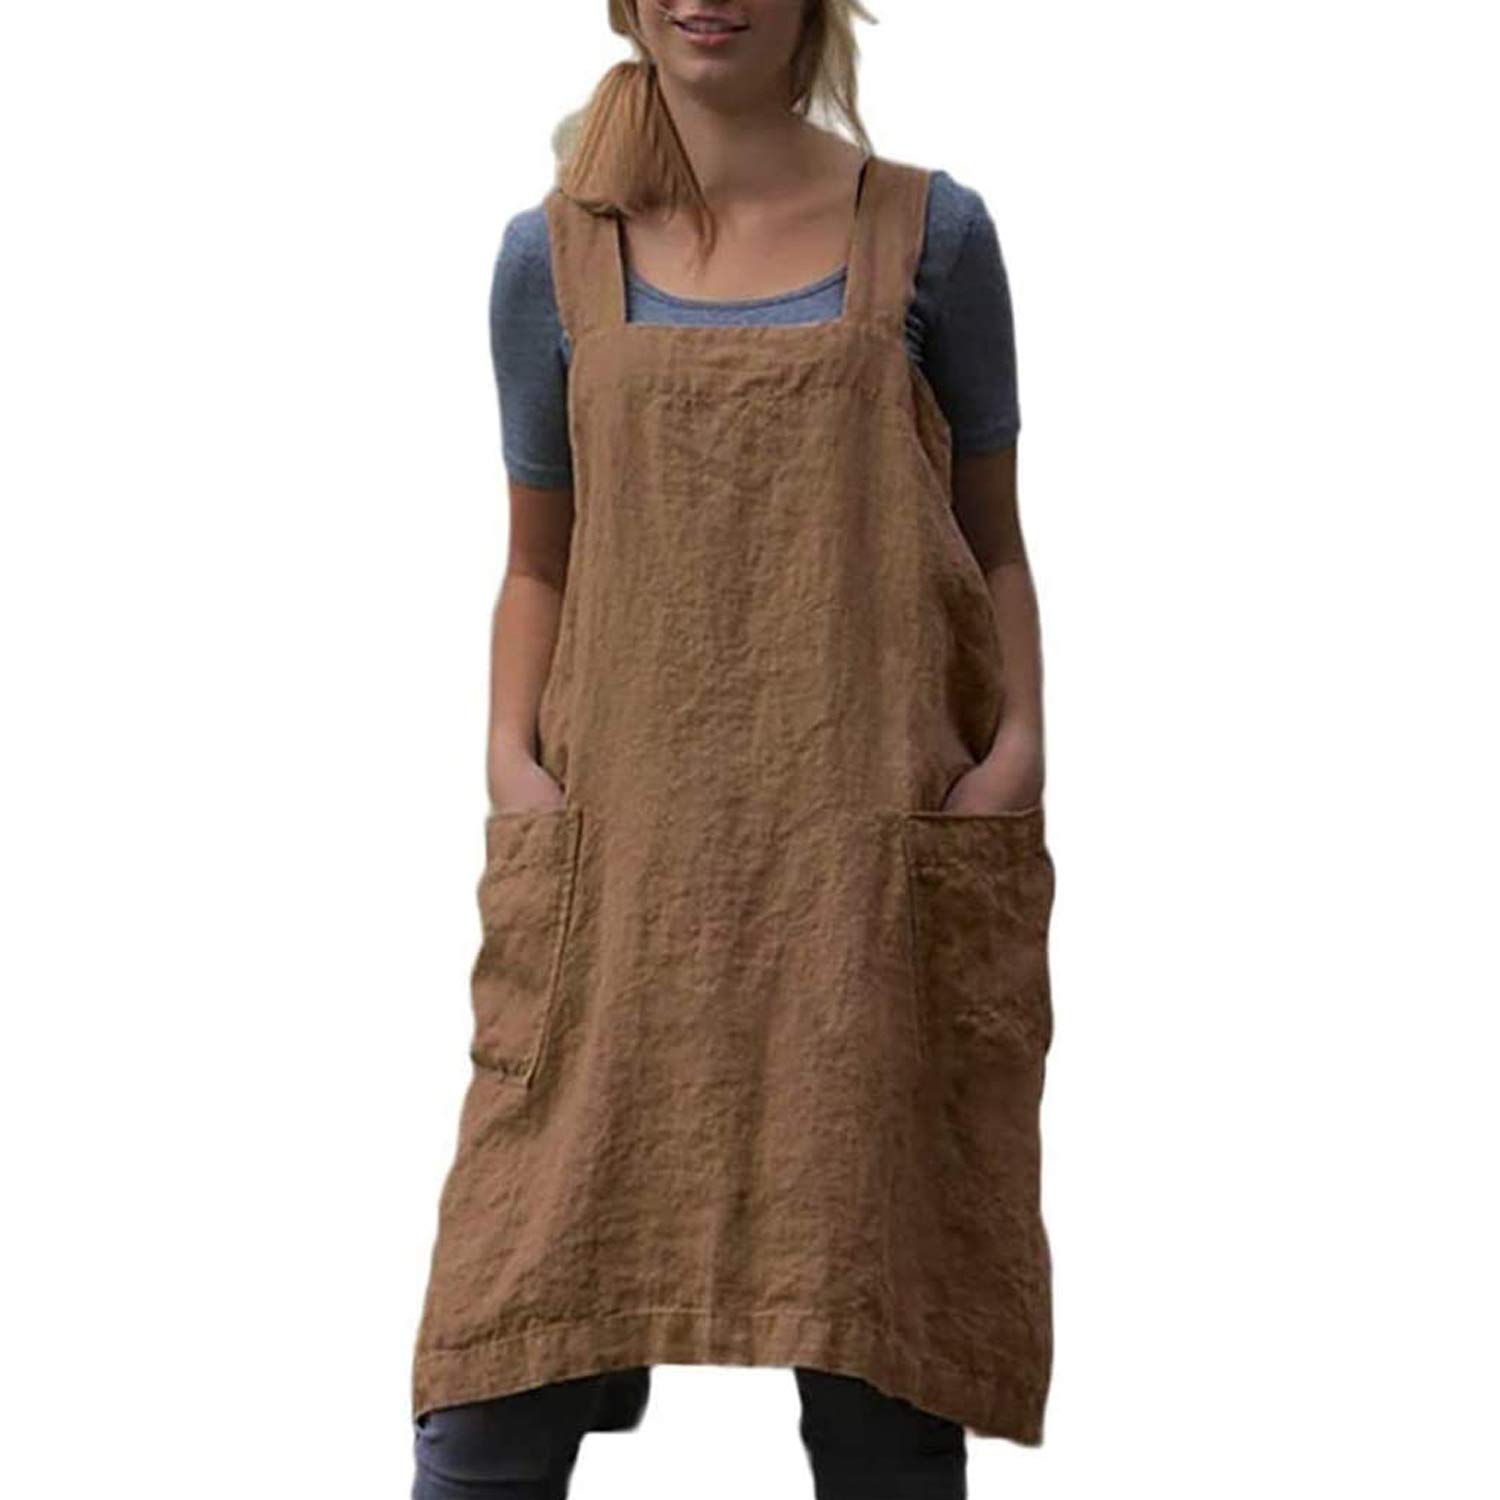 YESDOOD cotton Linen Apron cross Back Apron for Women with Pockets Pinafore Dress for Baking cooking